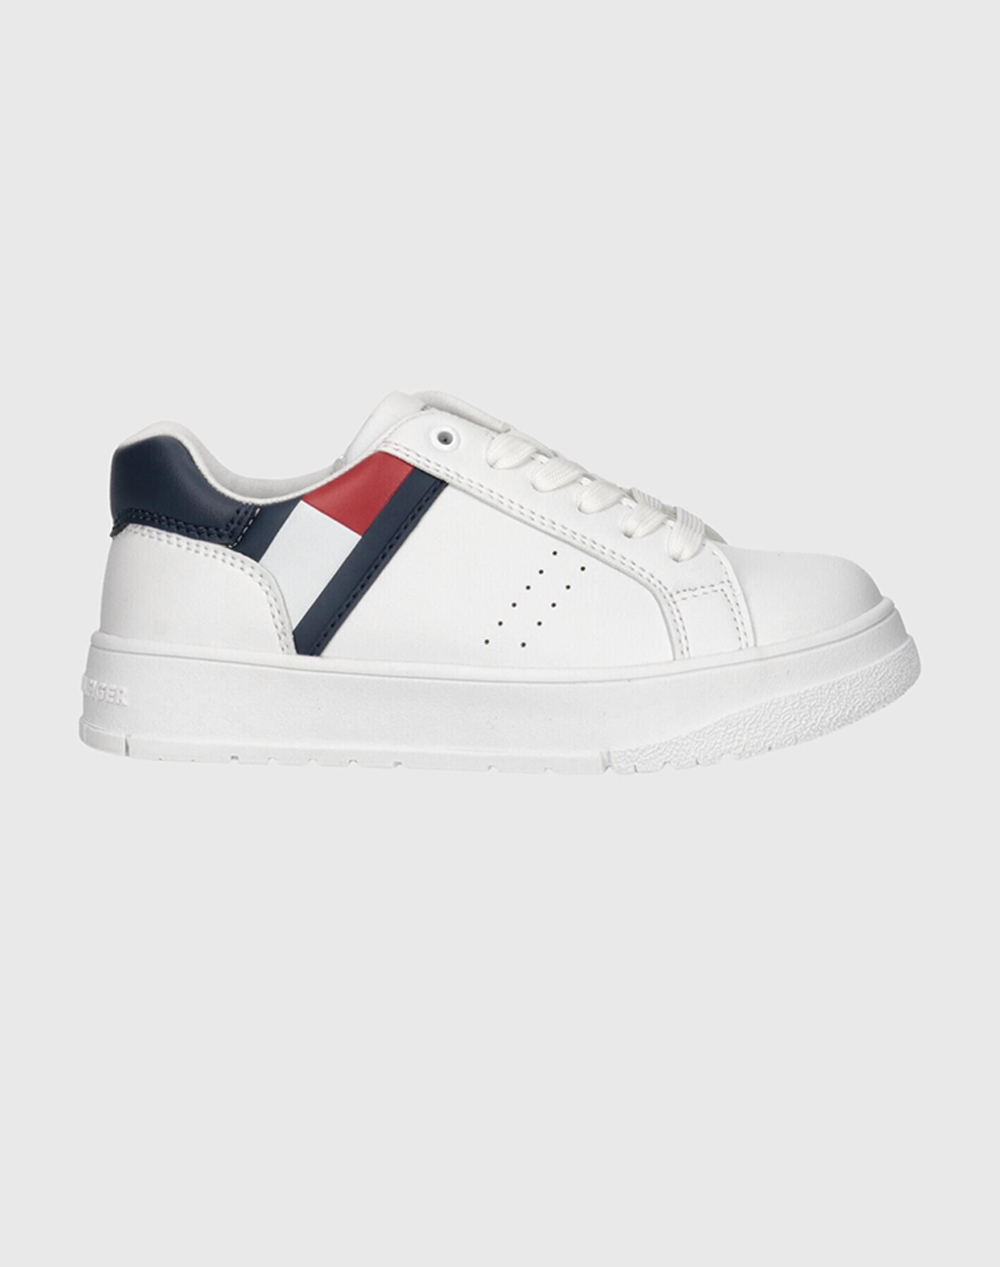 TOMMY HILFIGER FLAG LOW CUT LACE-UP SNEAKER T3X9-33356-1355 30-34-100 White 3832ATOMM6070039_XR22414